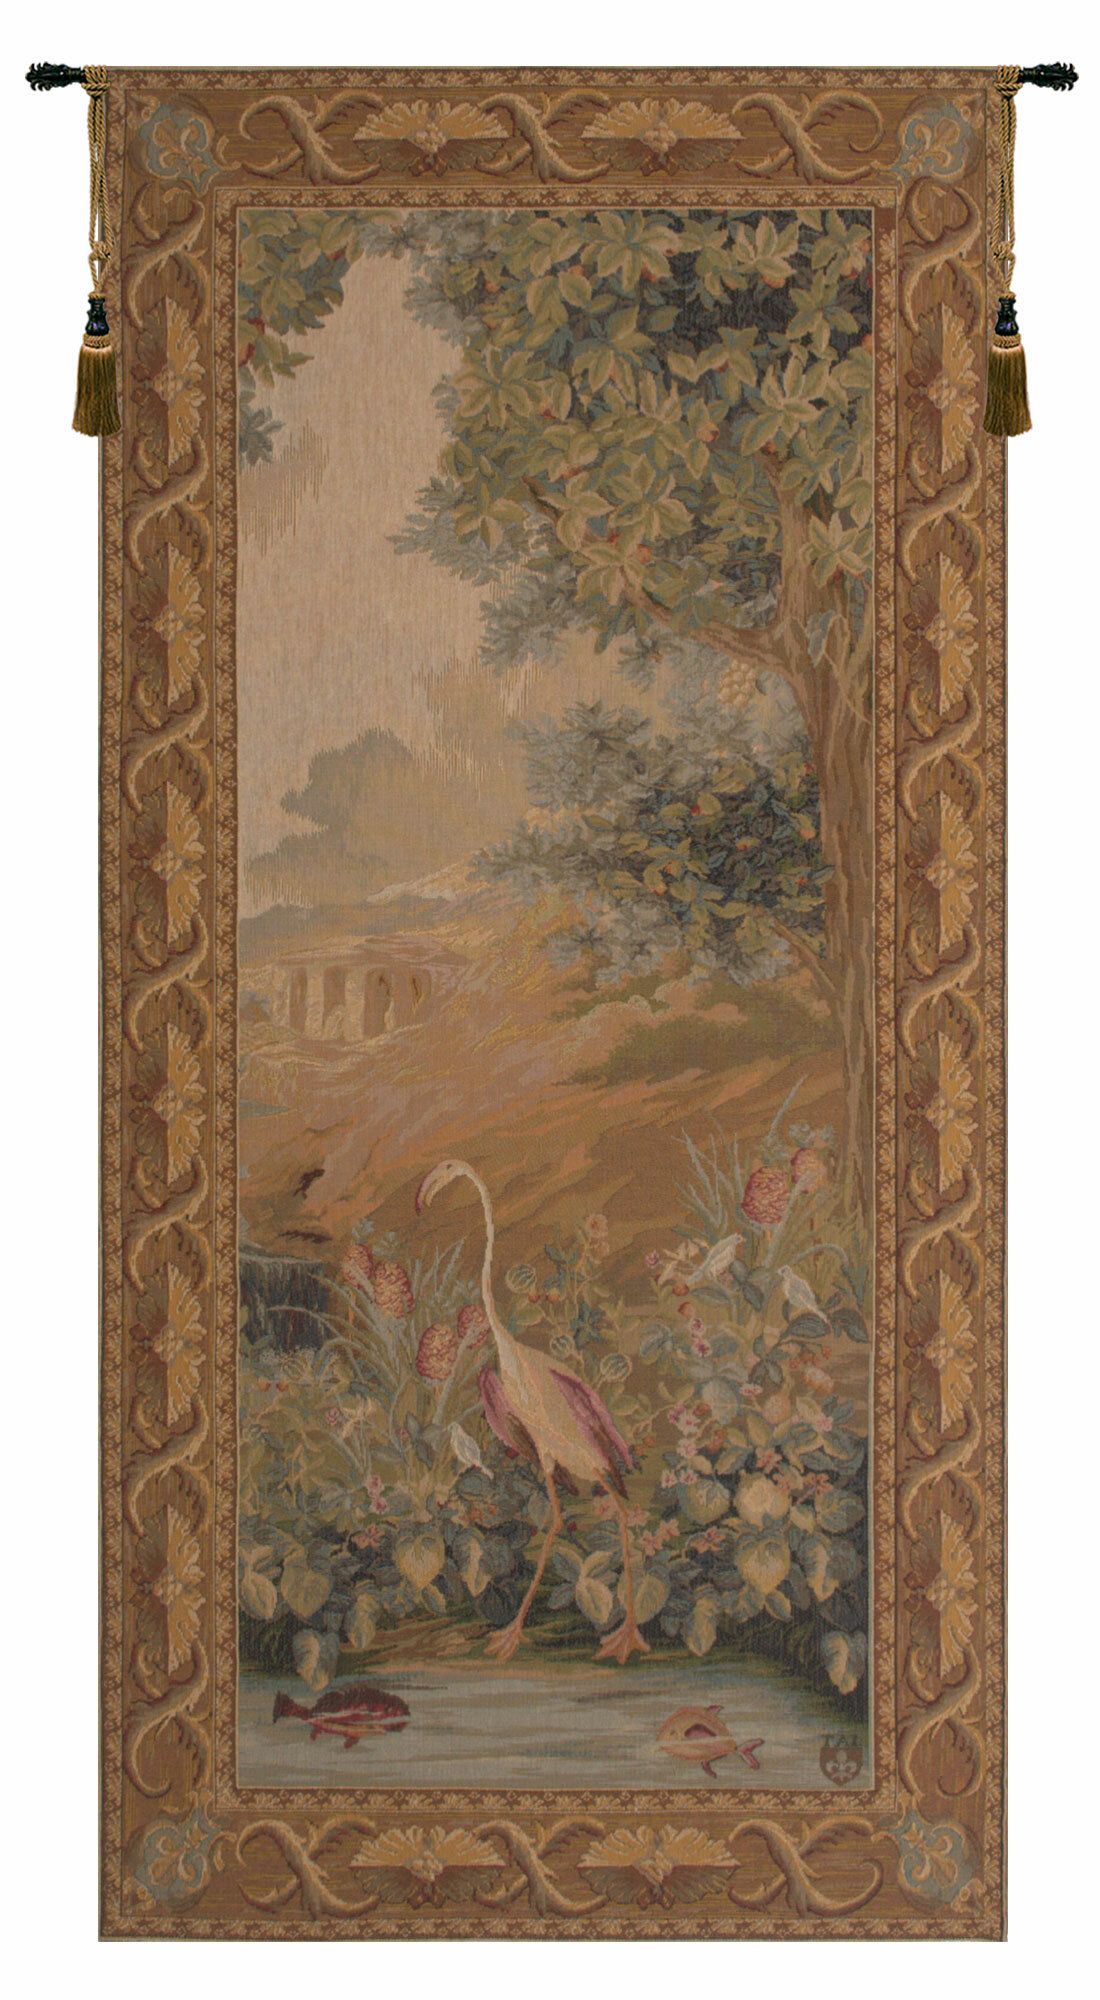 European Le Point Deau Flamant Rose Tapestry In Most Current European Le Point Deau Flamant Rose Tapestries (View 1 of 20)